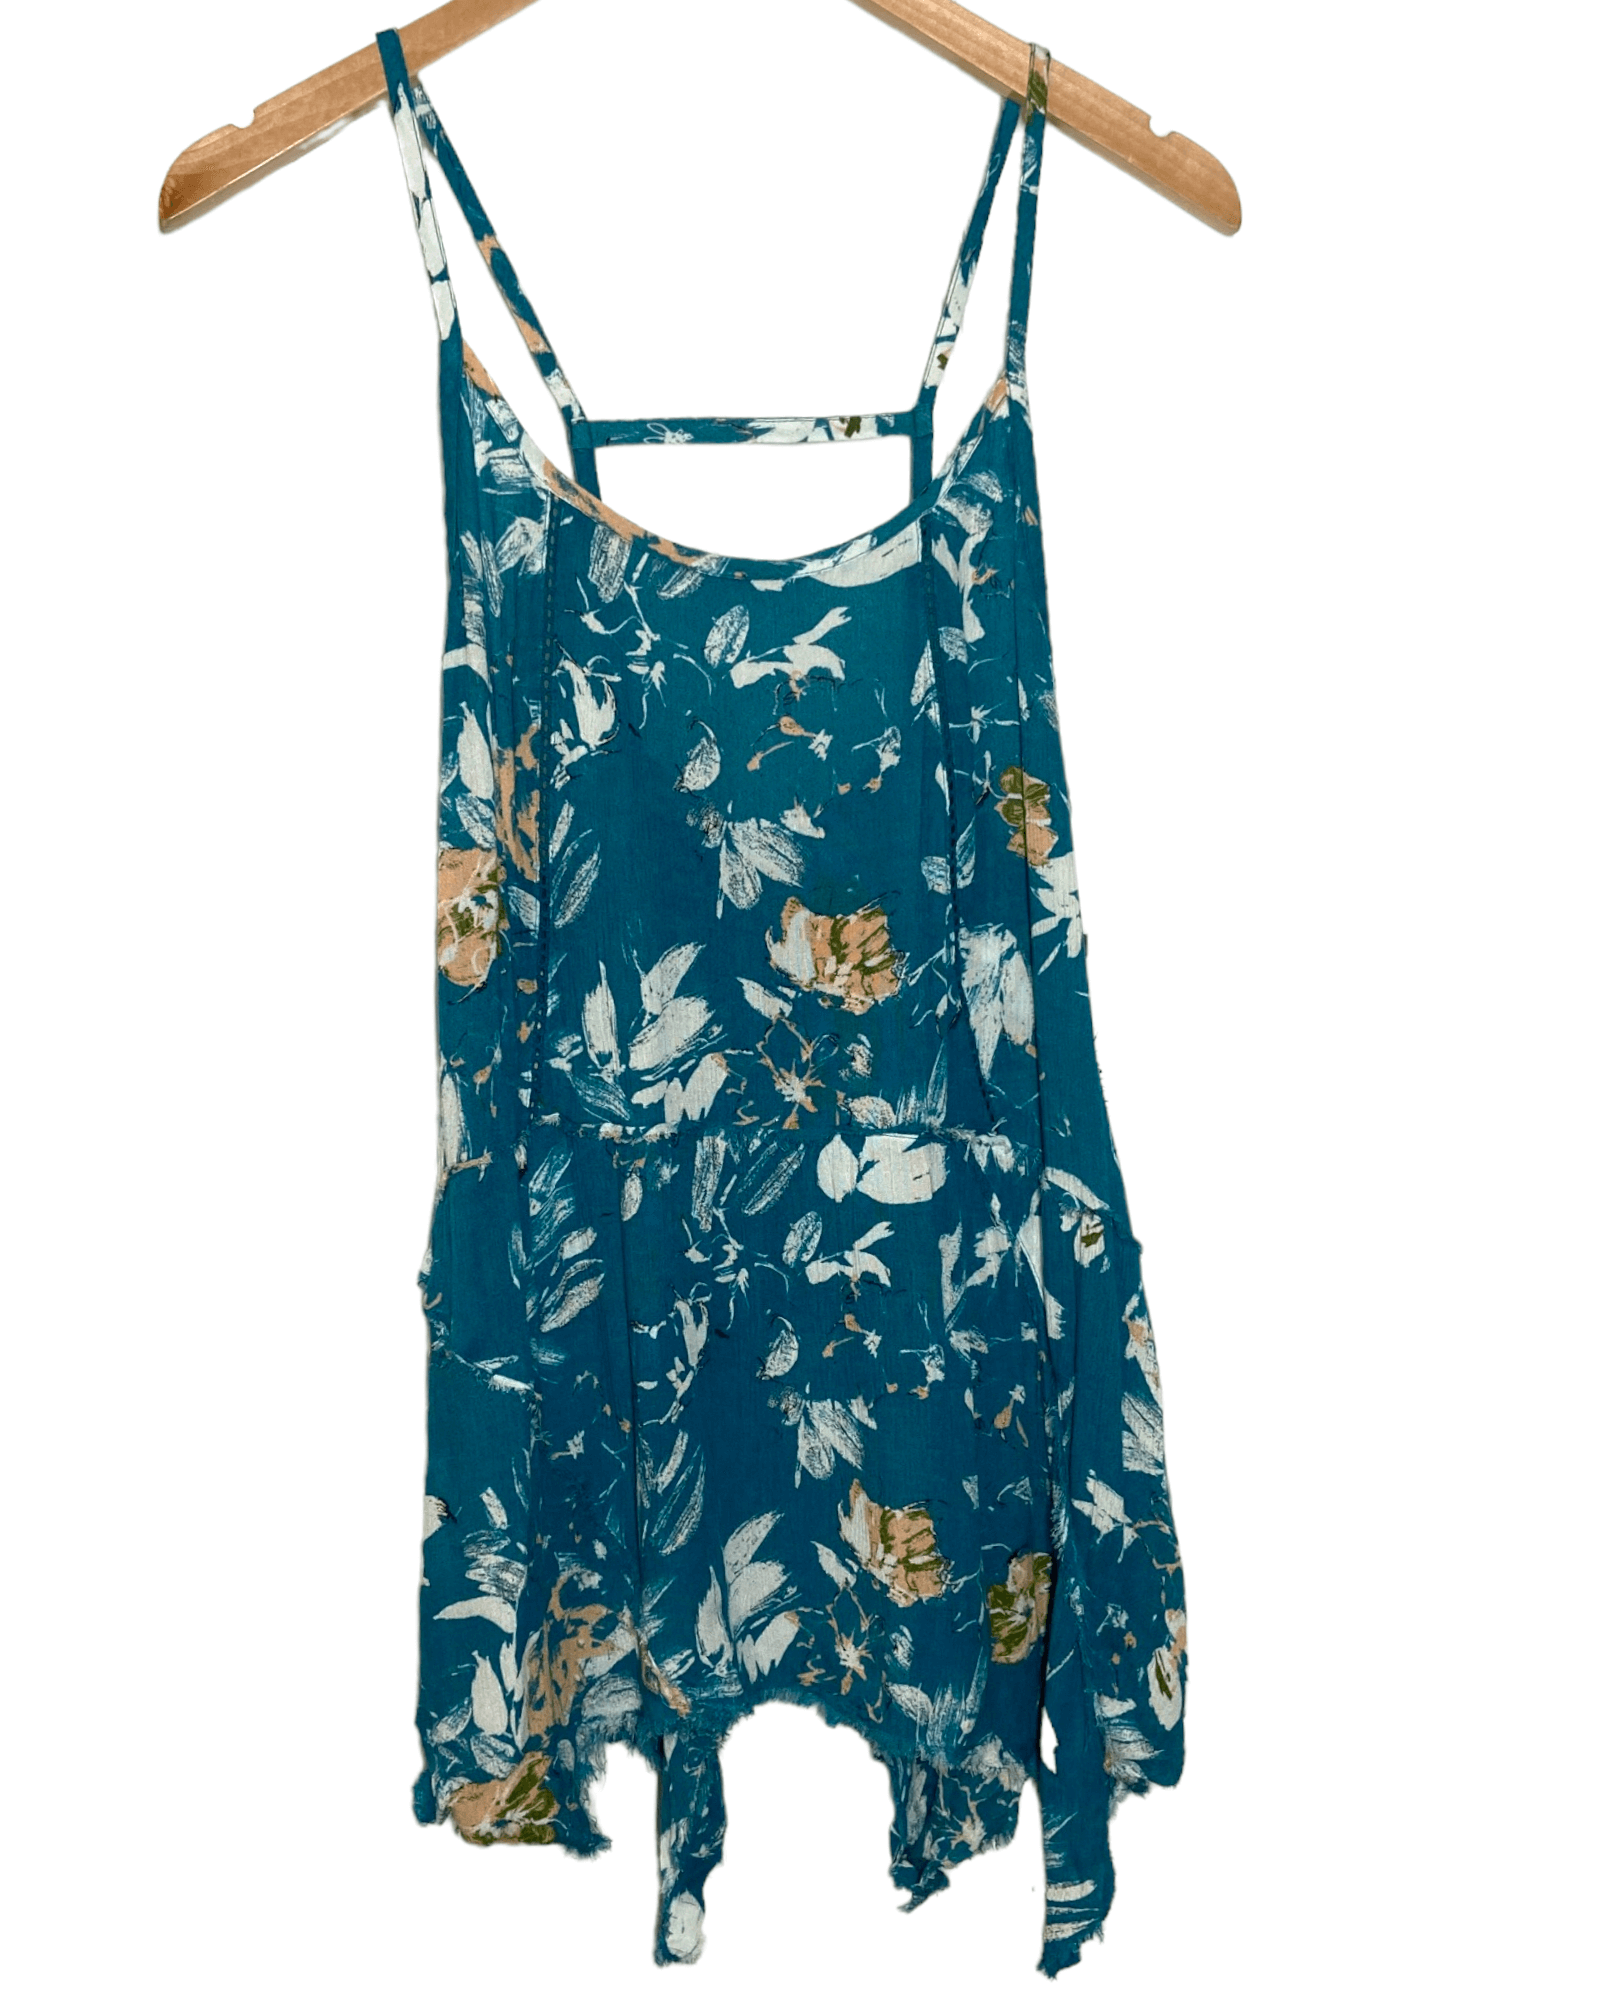 Soft Autumn MELROSE AND MARKET teal floral swing top